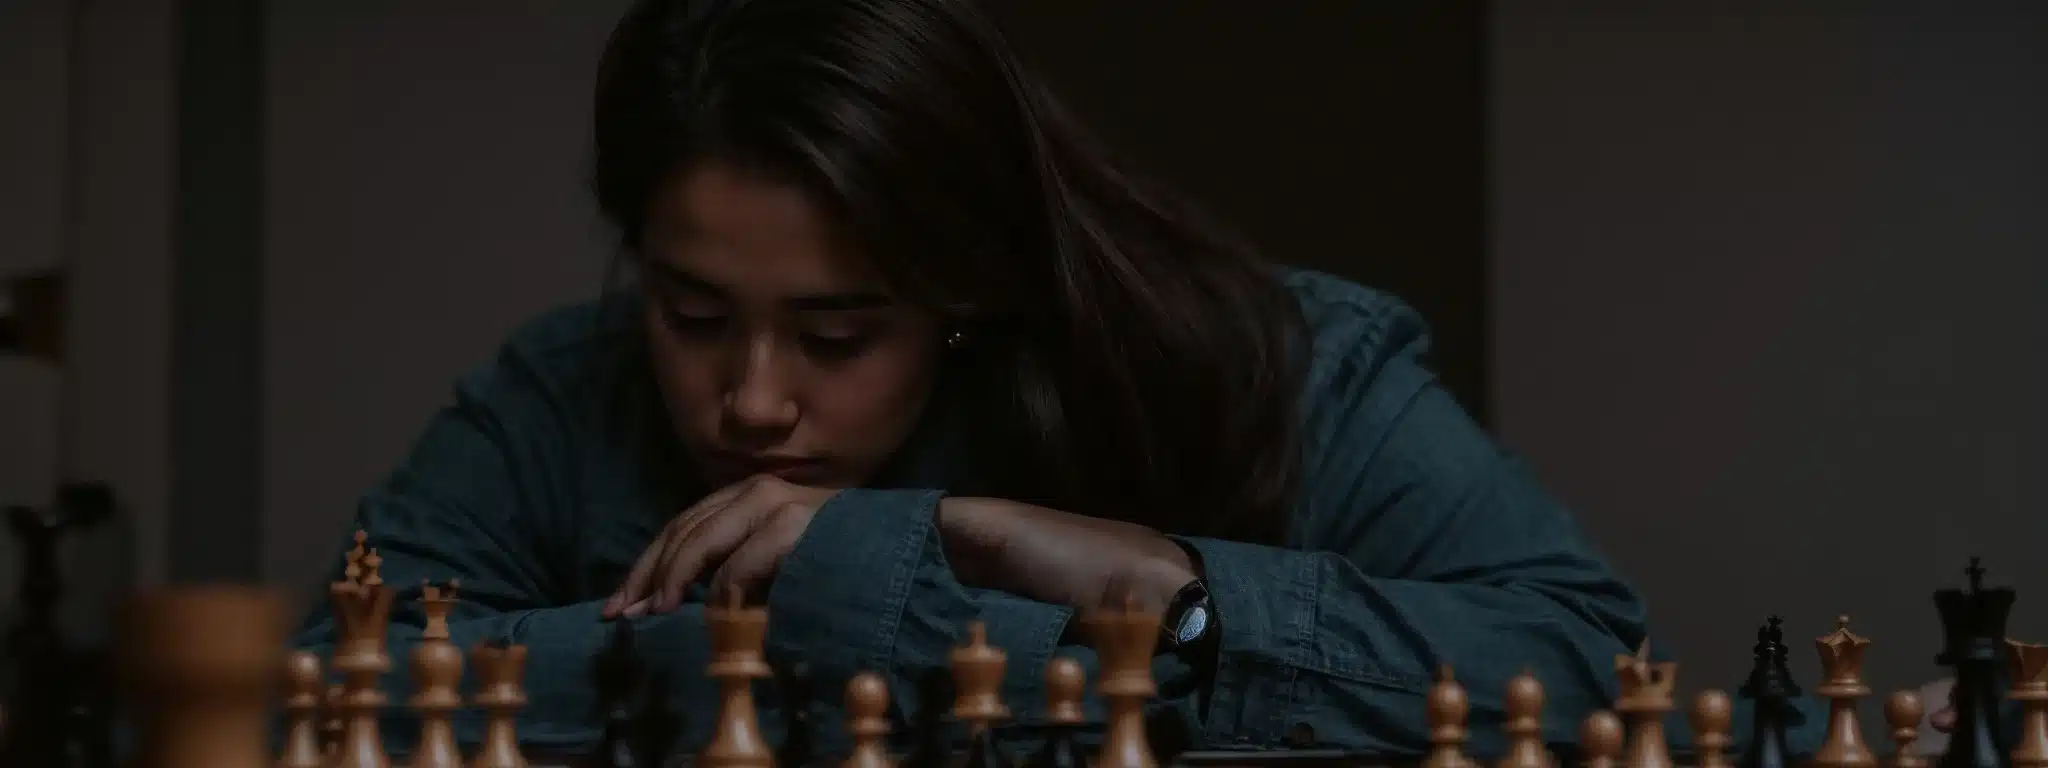 A Business Professional Playing A Chess Game, Contemplating A Strategic Move.